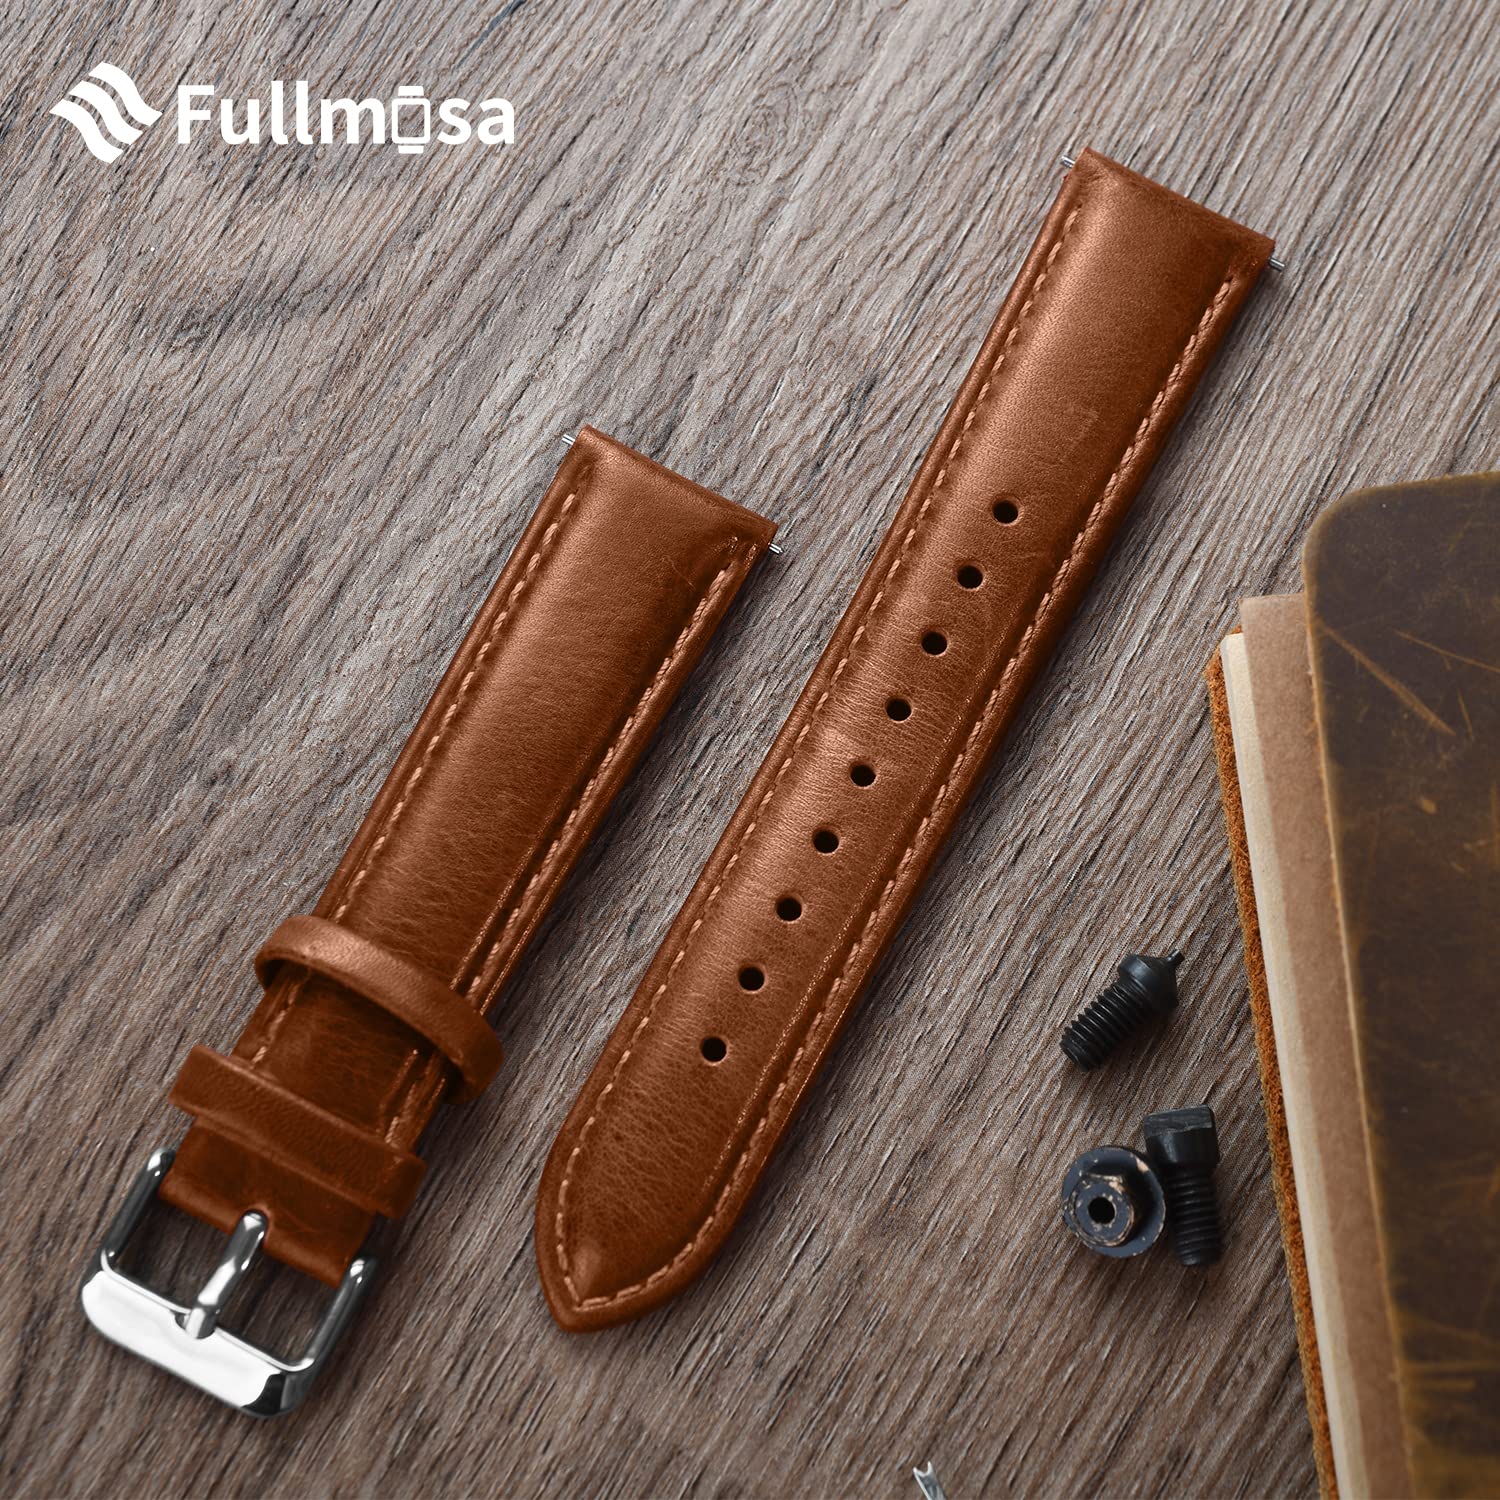 Fullmosa Treen Gradient Color Tanned 18mm 20mm 22mm Leather Watch Bands, Quick Release Watch Band for Men and Women, Fits Samsung Galaxy Watch 5/4/3,Garmin Watch,Huawei,Fossil,Seiko,Citizen,Ticwatch